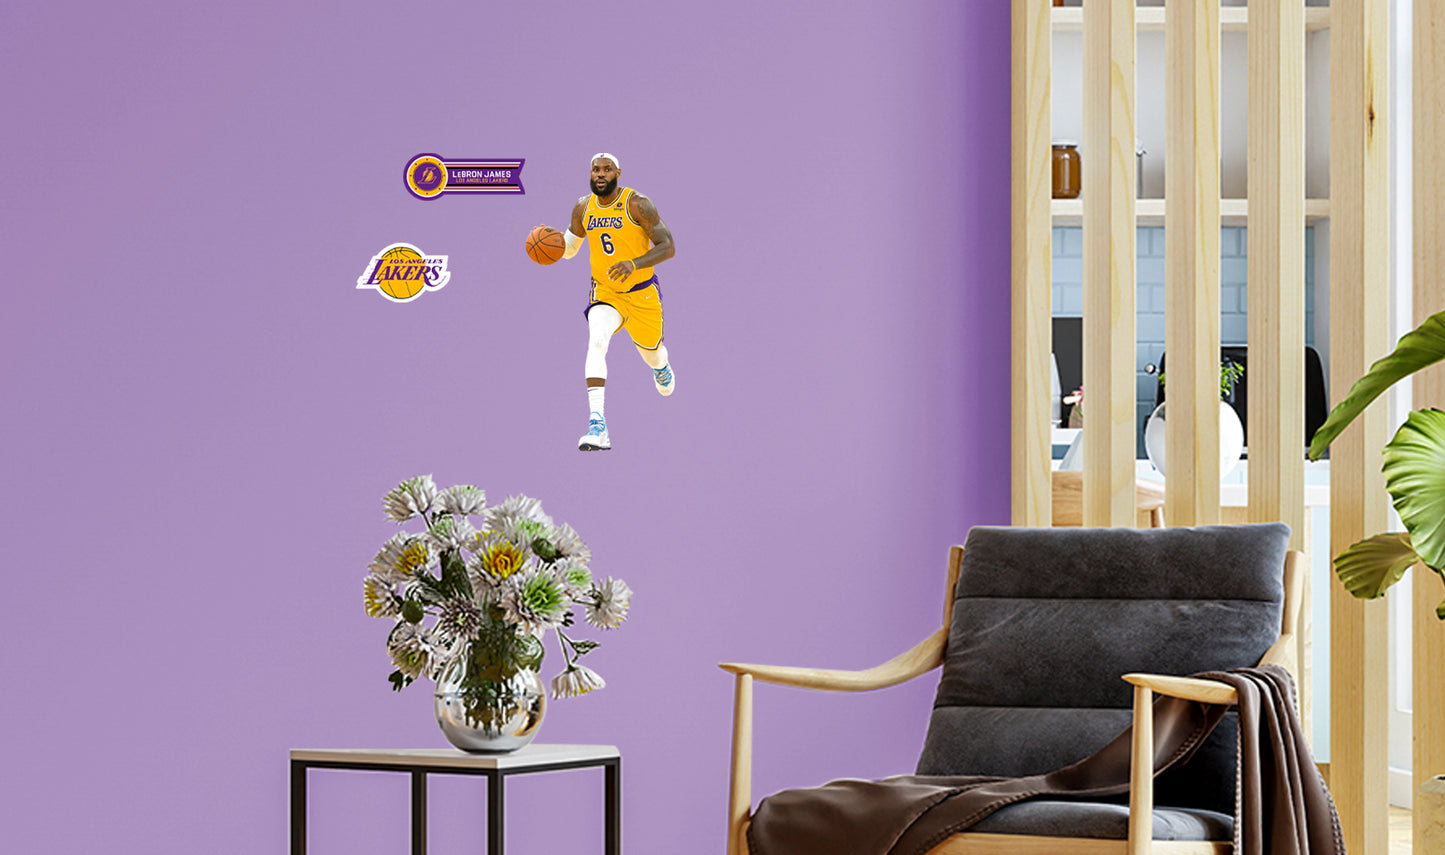 Los Angeles Lakers: LeBron James No.6 - Officially Licensed NBA Removable Adhesive Decal